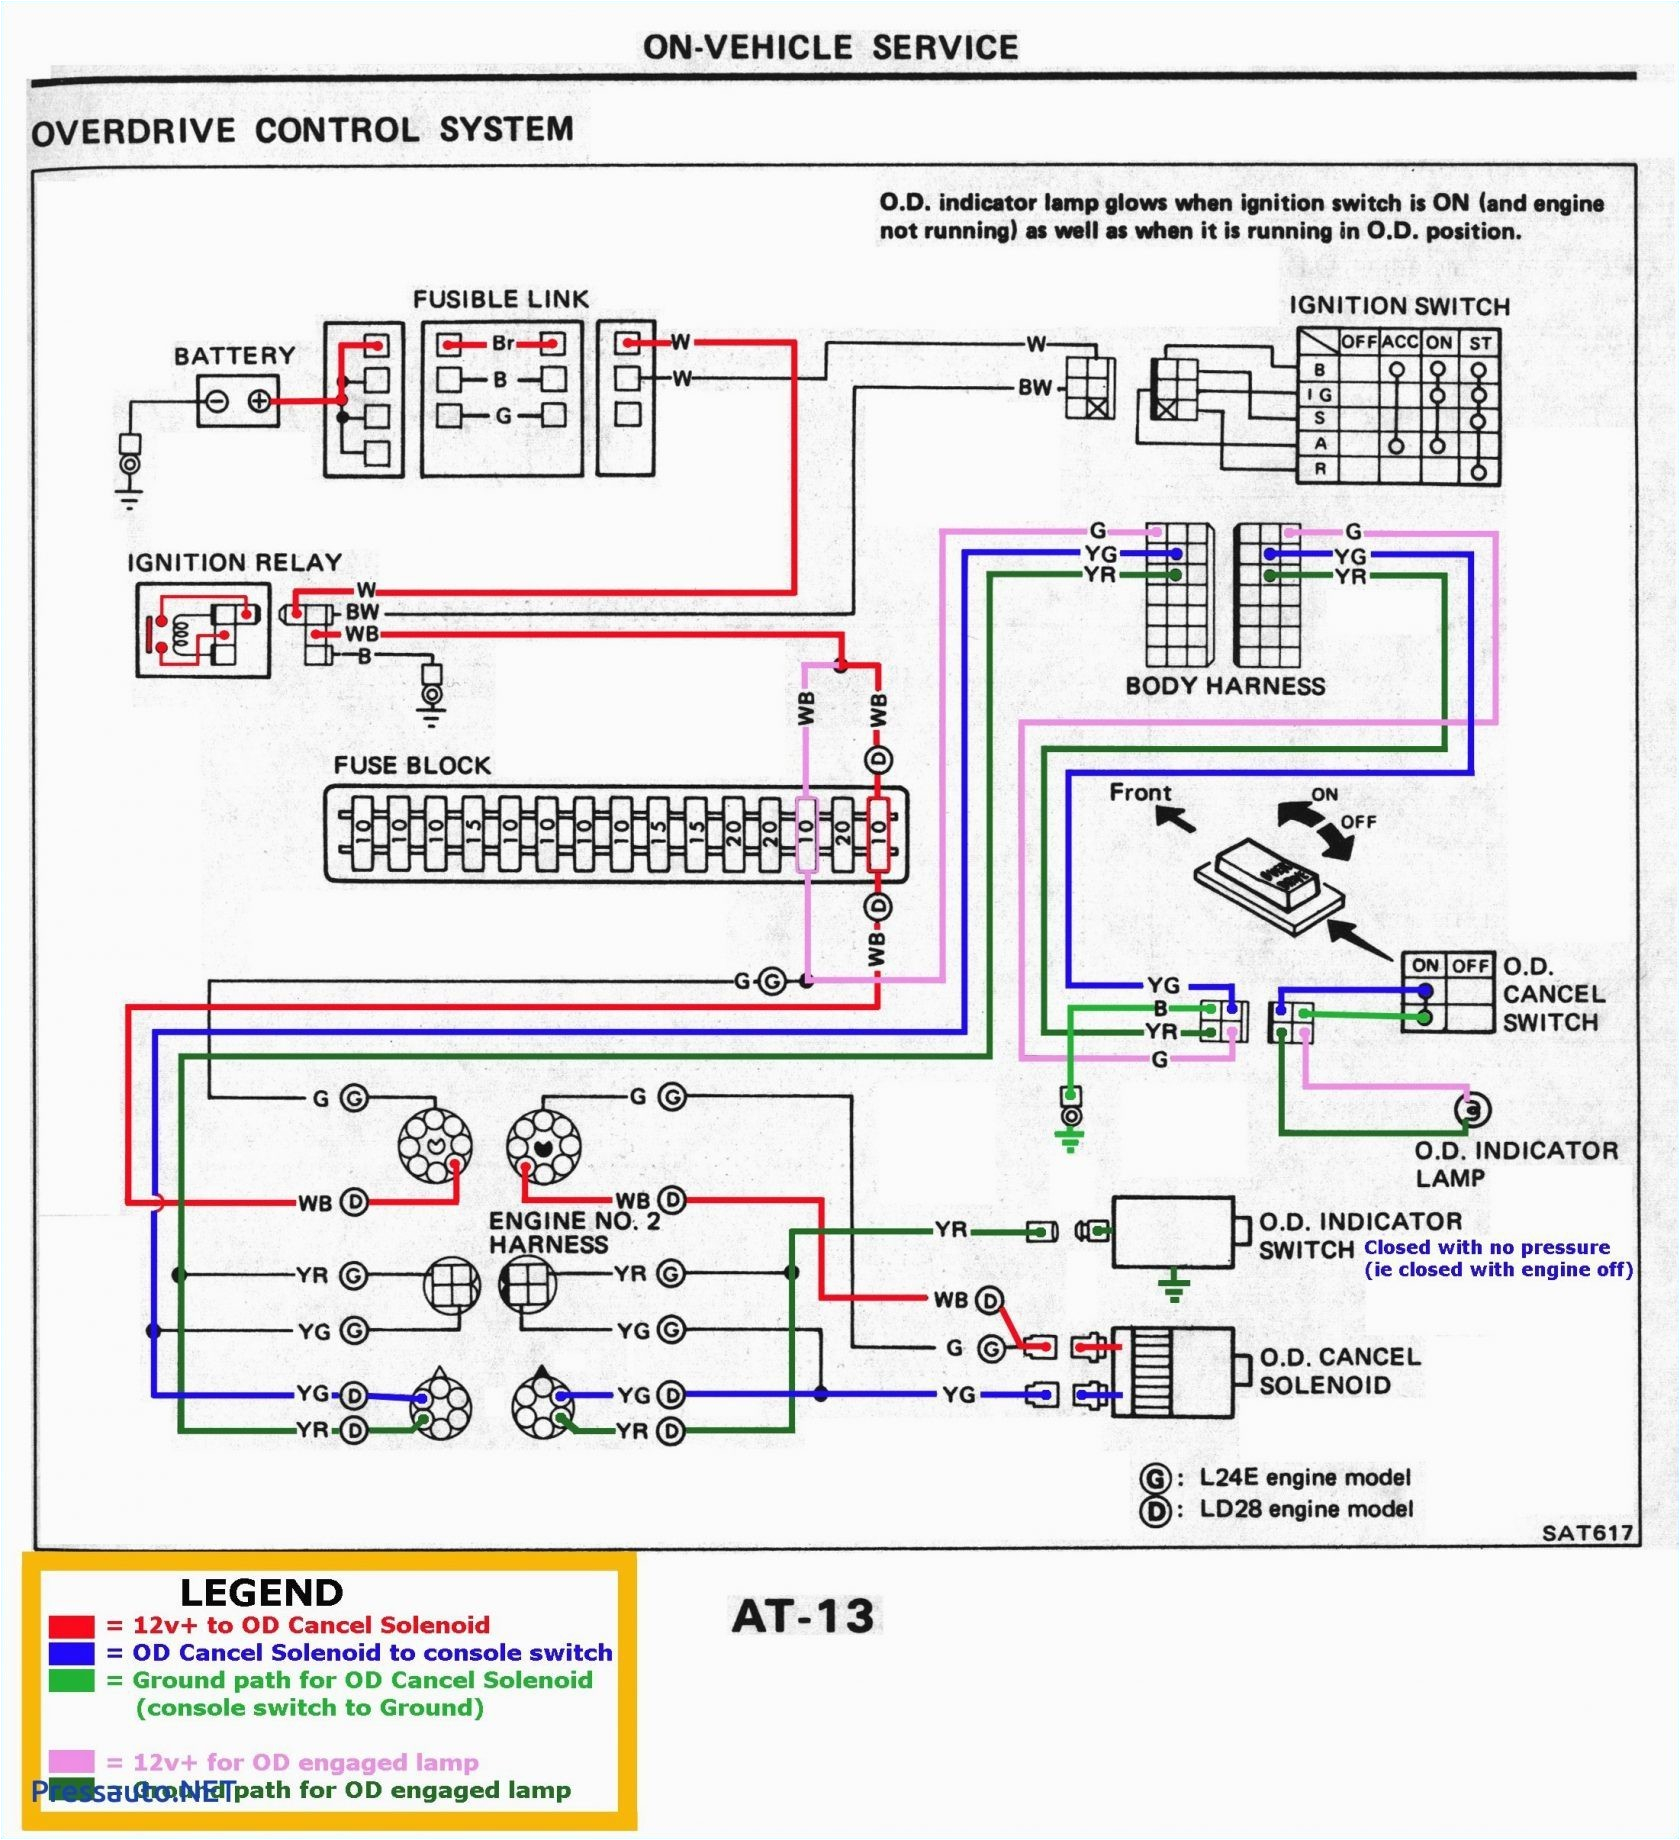 amp research power step wiring diagram wiring schematic diagram mix amp research power step wiring harness